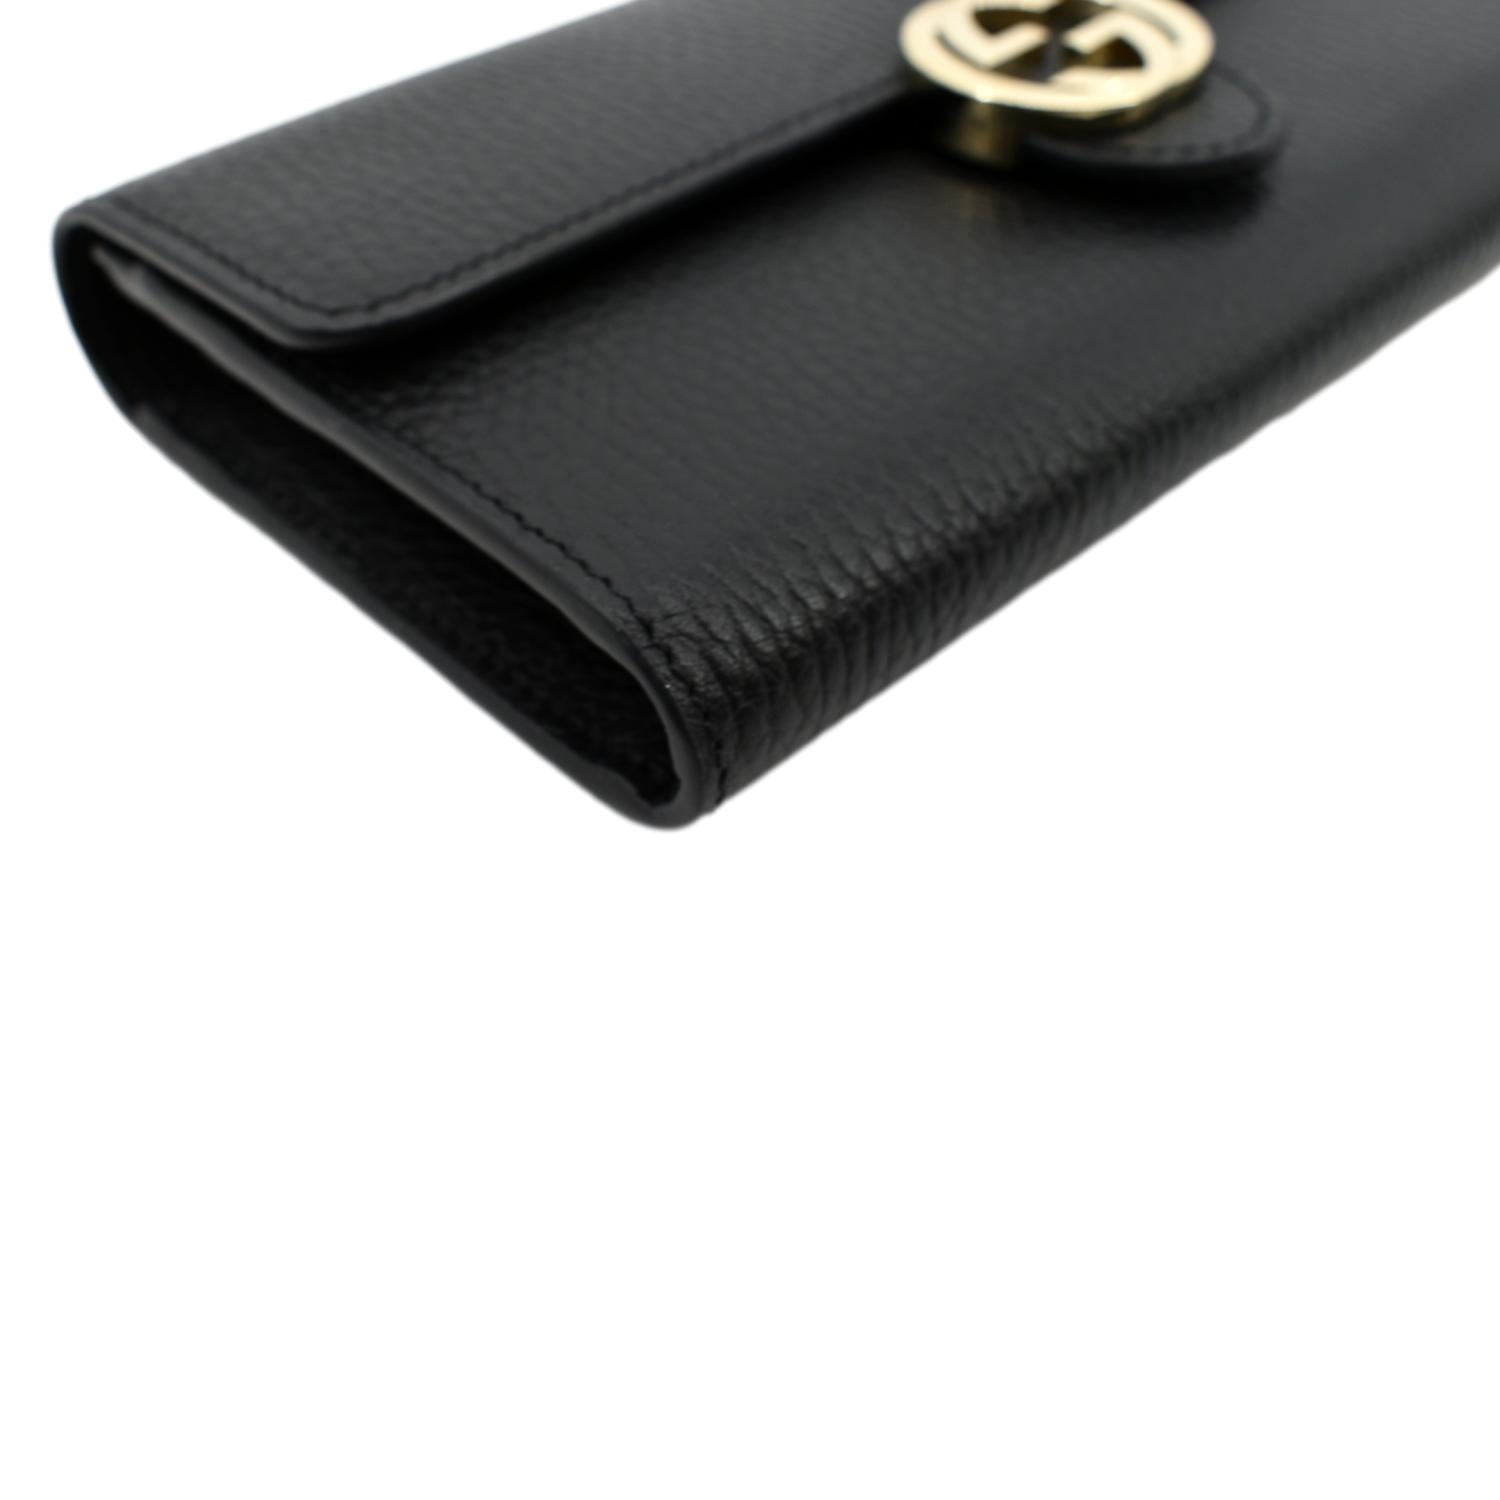 Leather wallet Gucci Black in Leather - 31228058